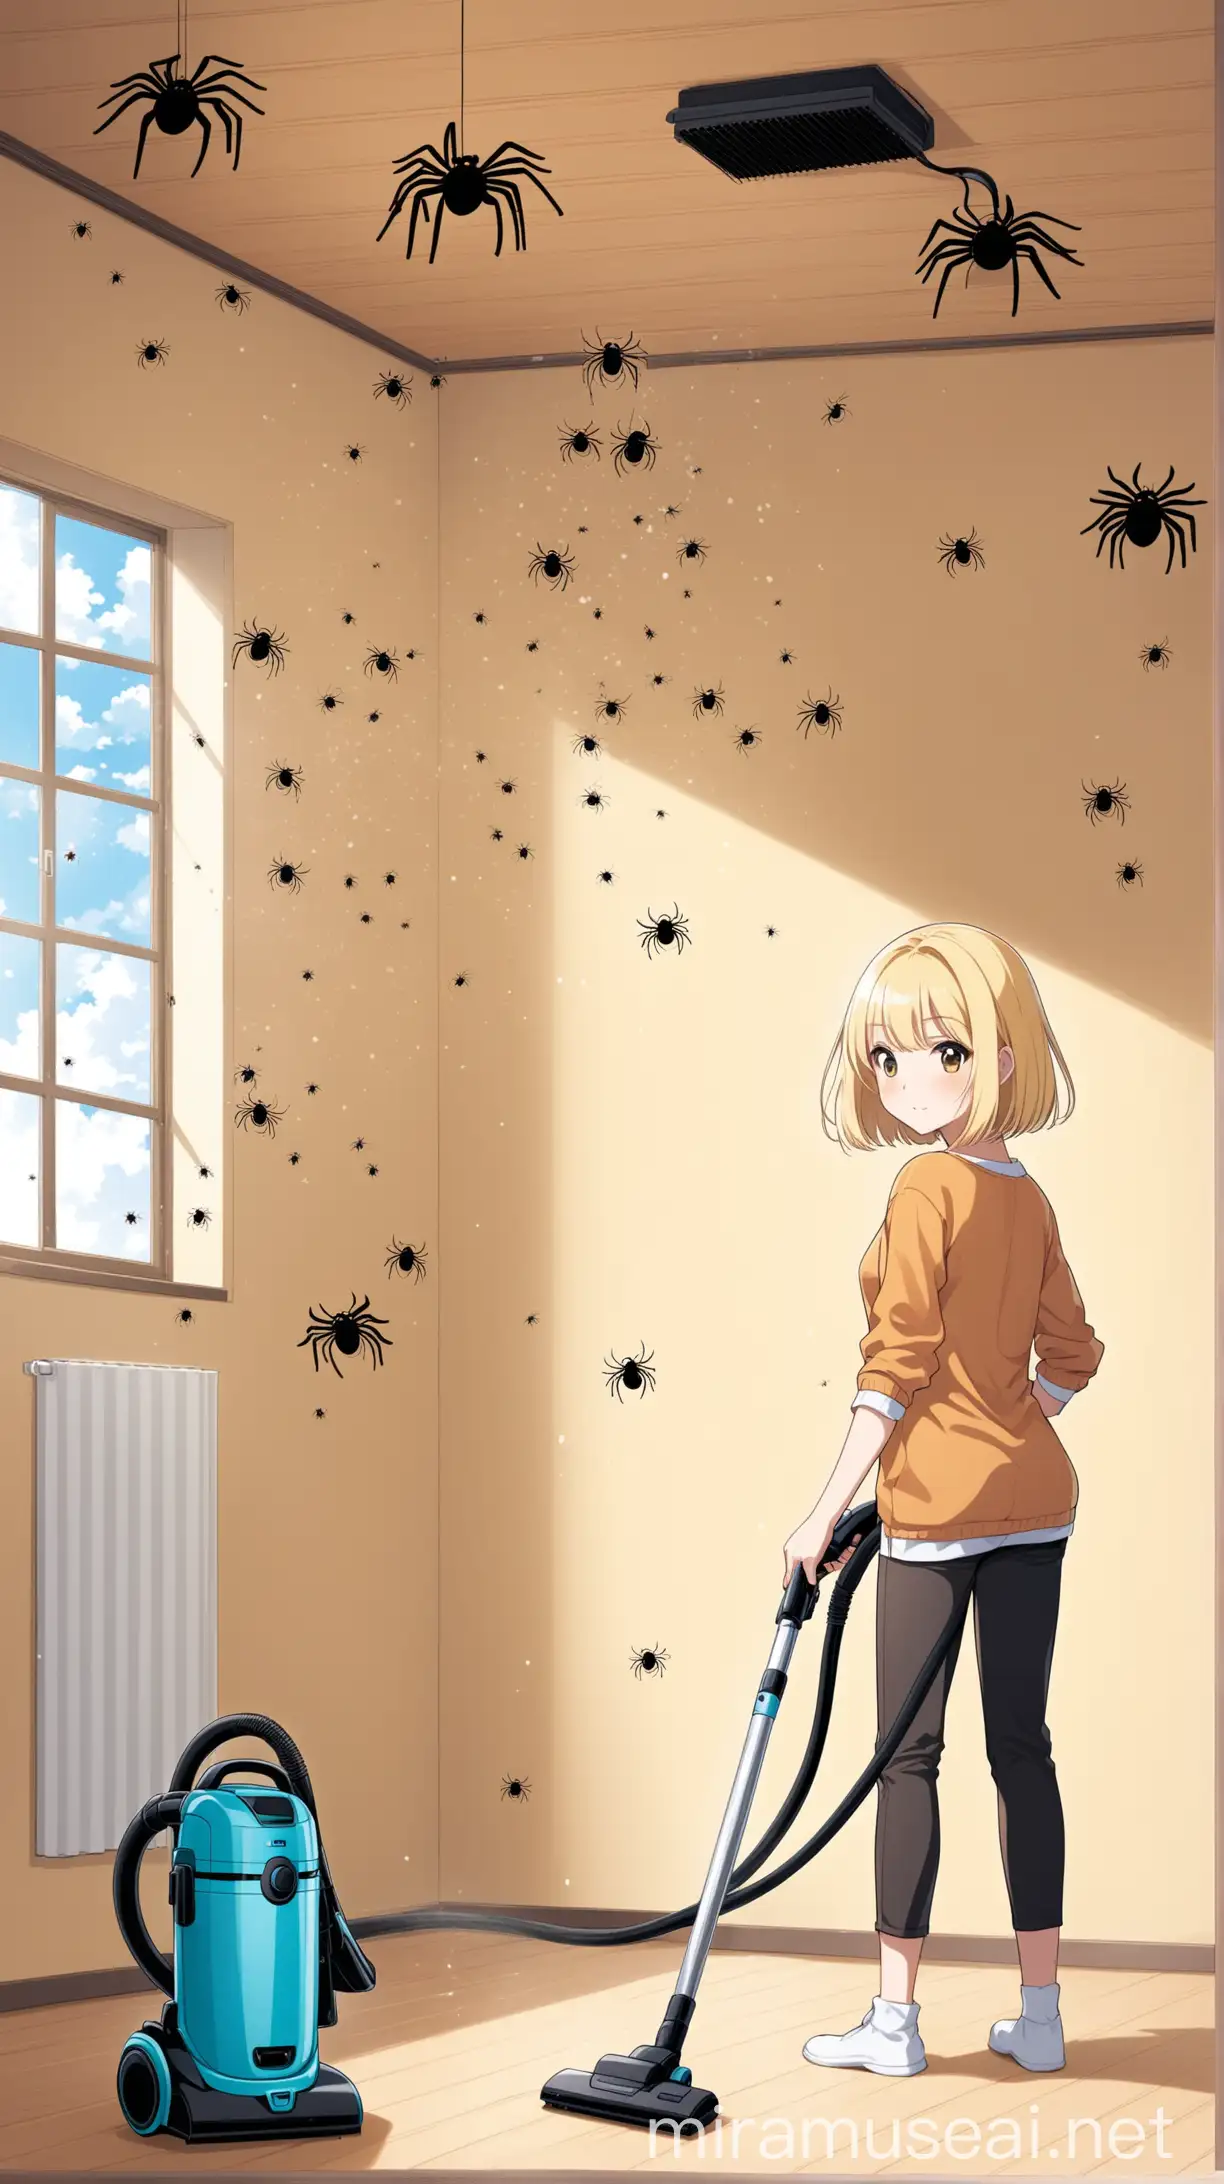 anime a blond girl with a bob haircut is cleaning the apartment from spiders on walls and ceiling with a Handheld Vacuum Cleaner. The room is clean/cozy but has few spiders. a vacuum clear is handheld and doesn't have a base.